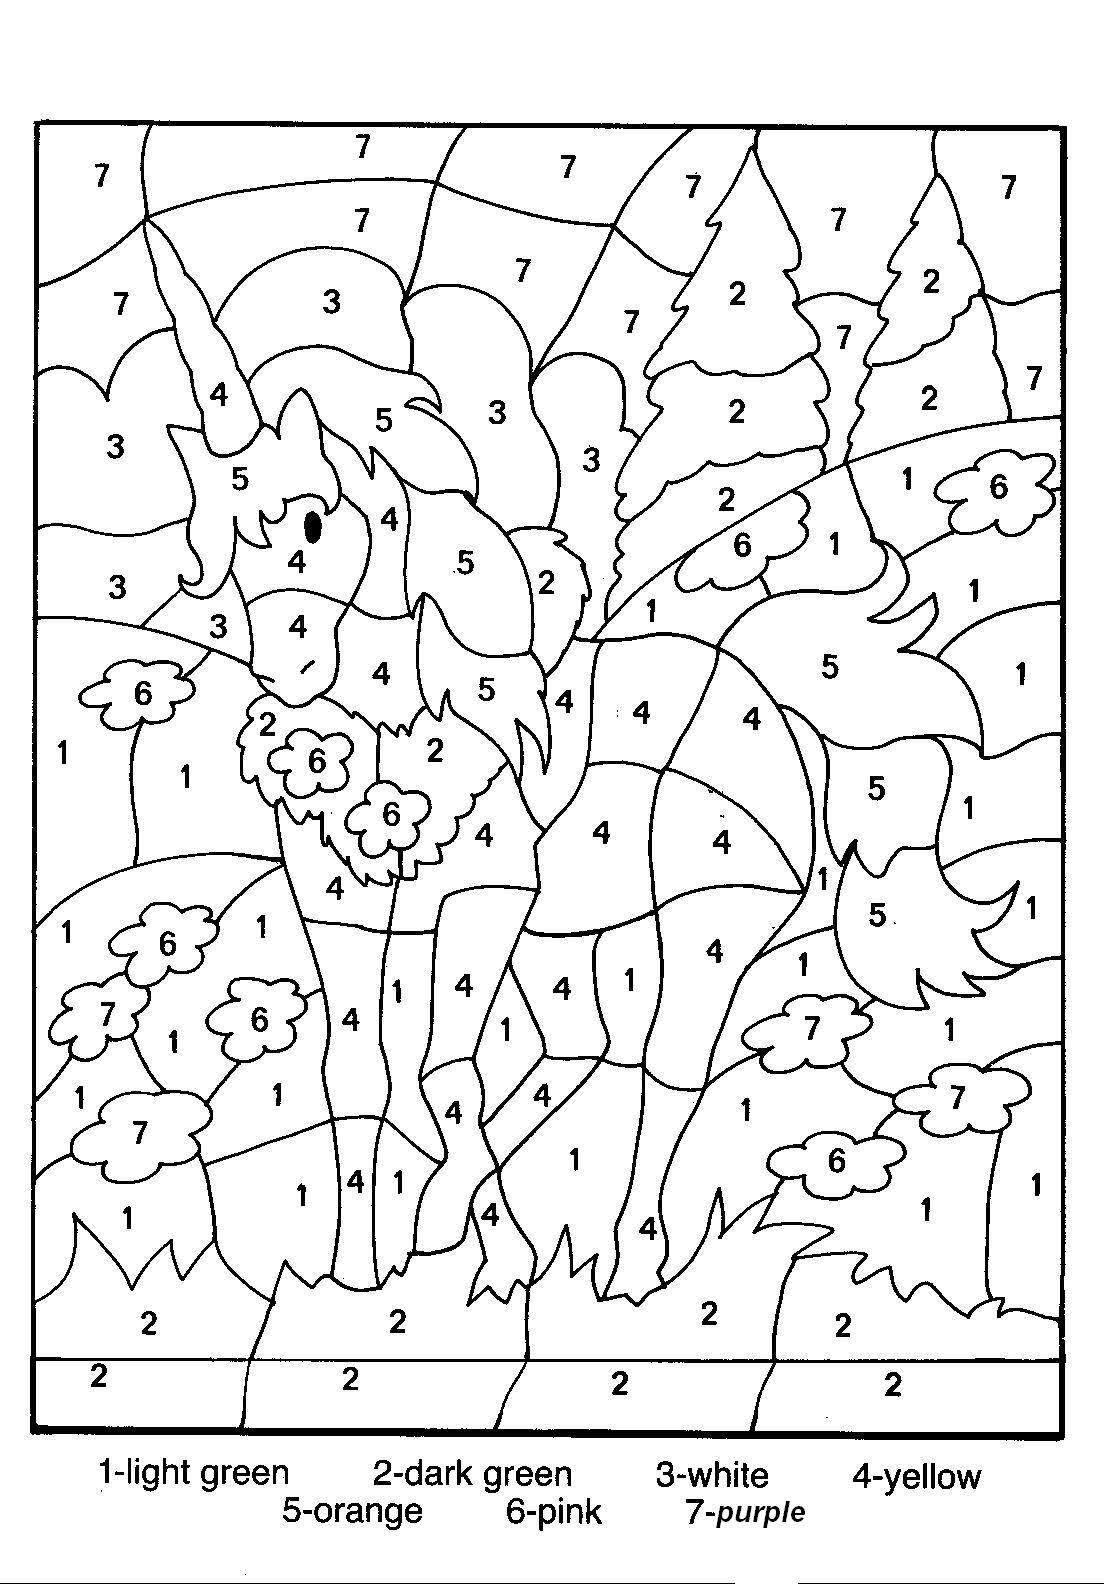 Unicorn For Coloring By Numbers Coloring Page   Free Printable ...